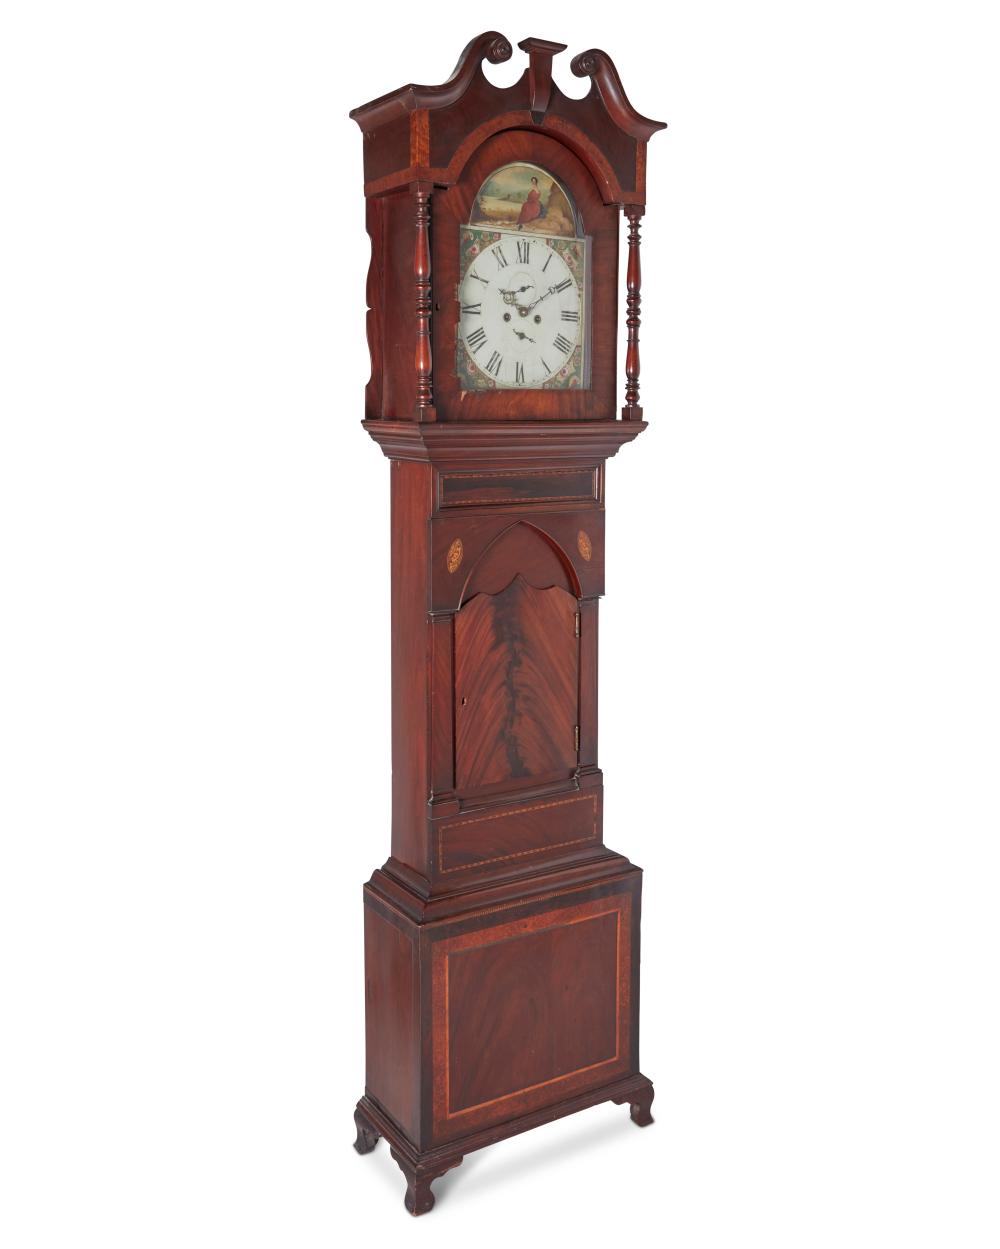 AN AMERICAN CARVED WOOD TALL CASE 2eed2c